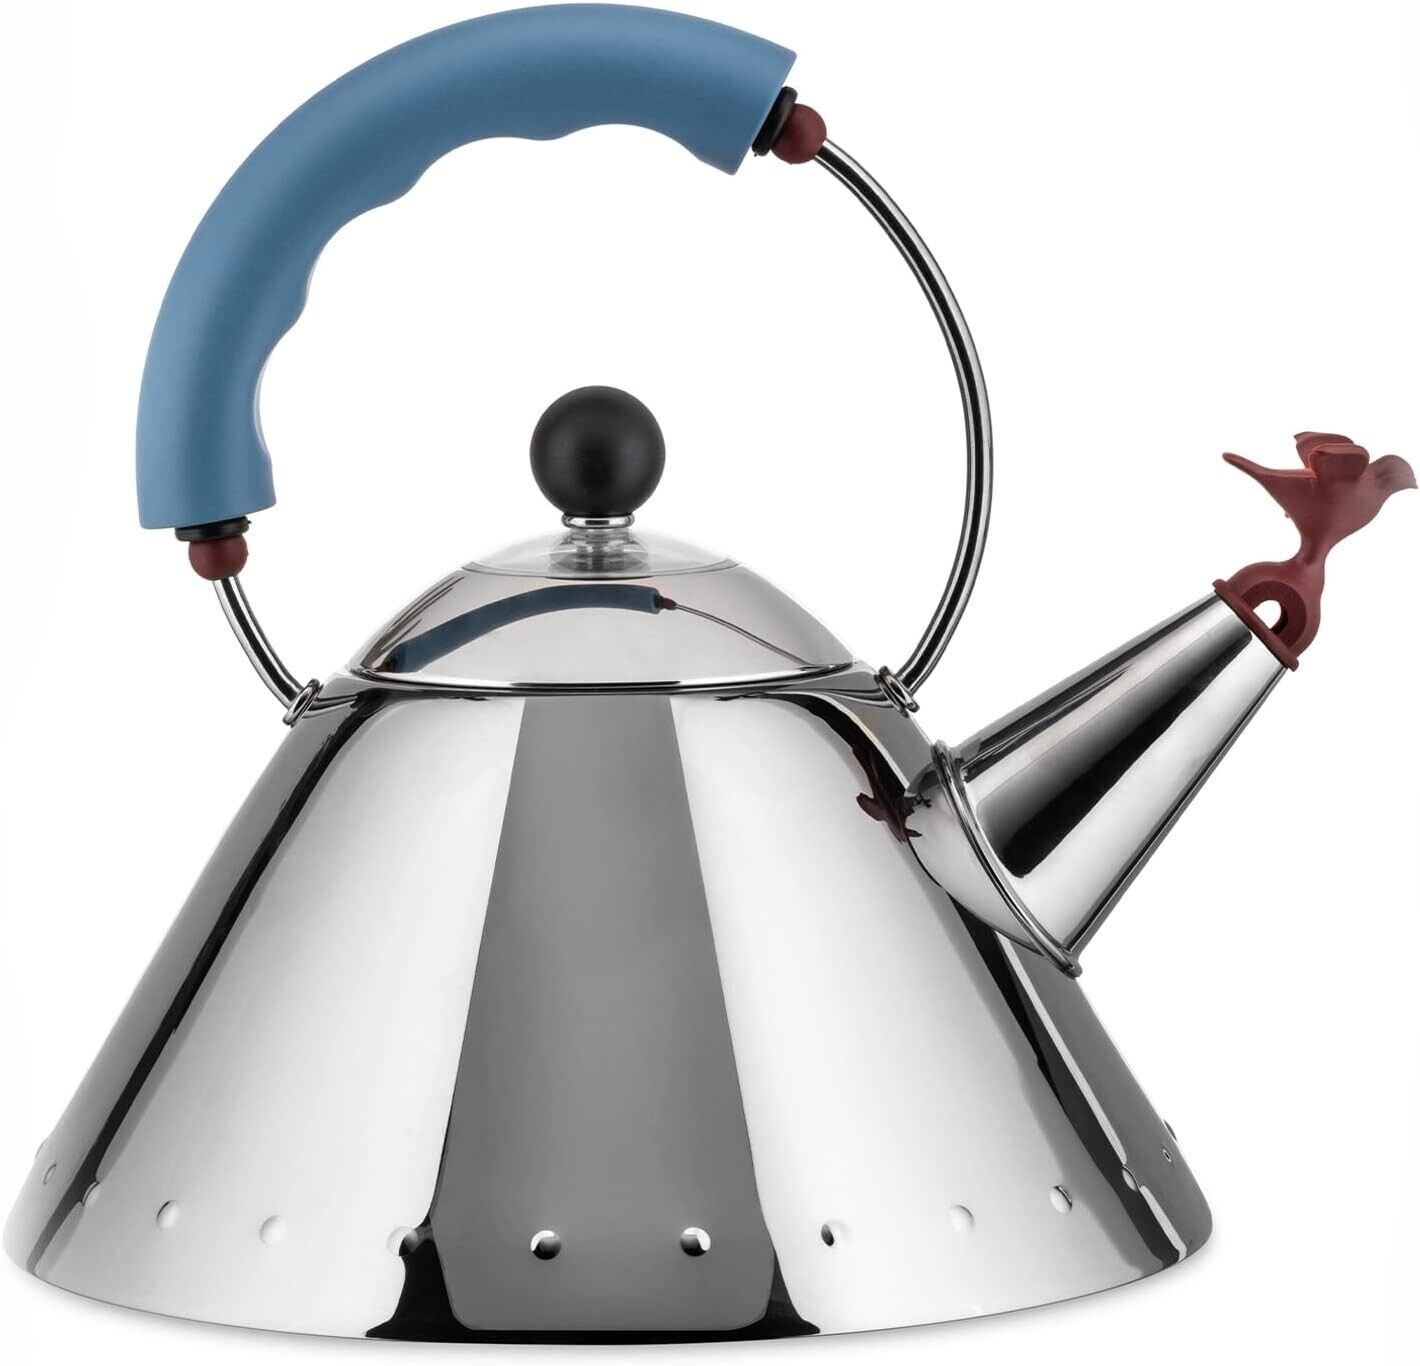 Alessi Michael Graves Kettle with Bird Whistle, Blue Handle